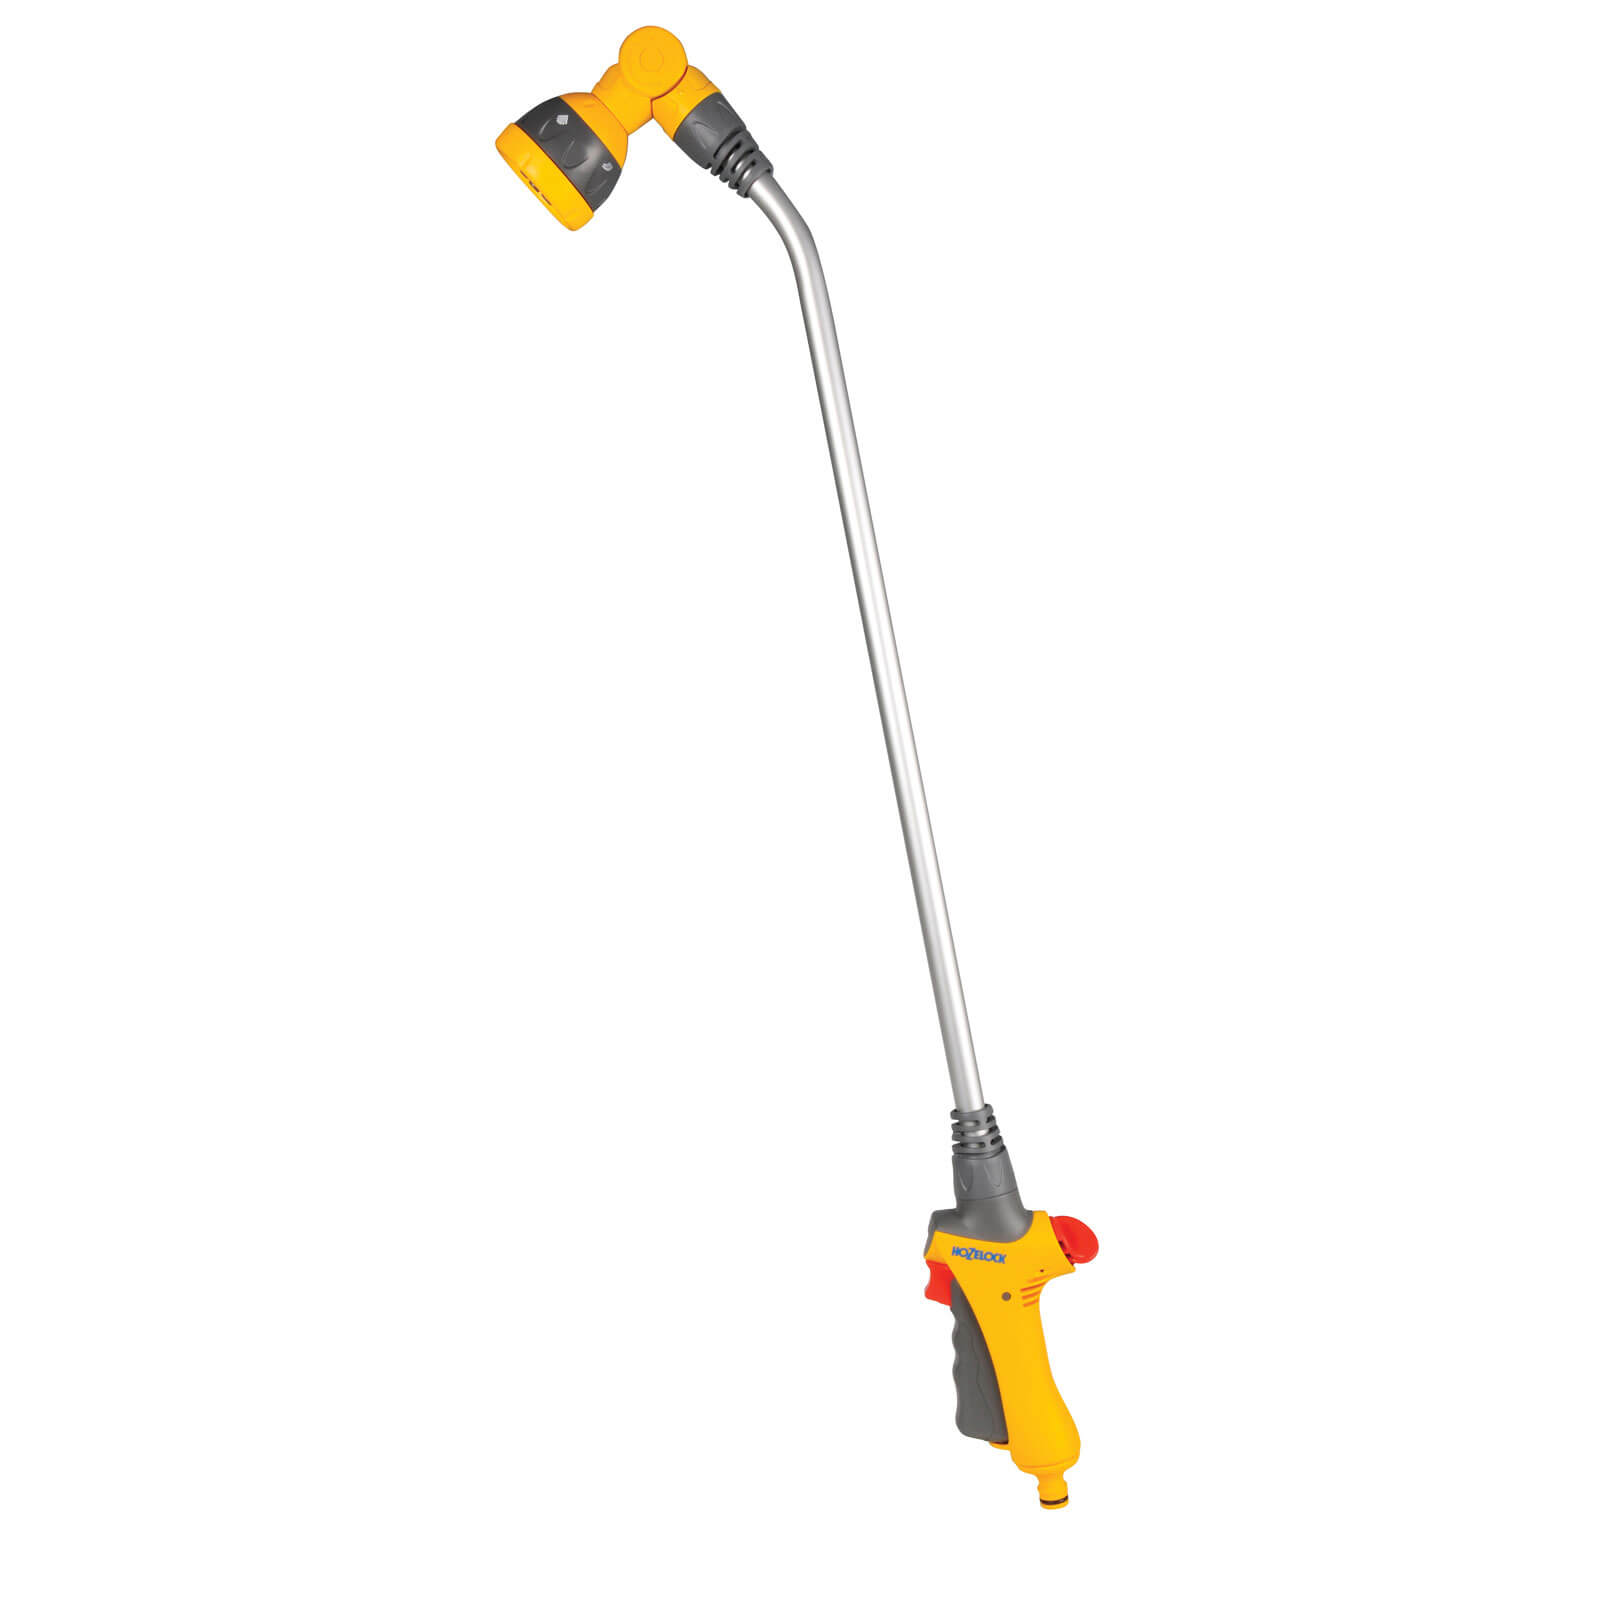 Image of Hozelock Long Reach Water Spray Lance 900mm with 5 Spray Patterns for Hose Pipes